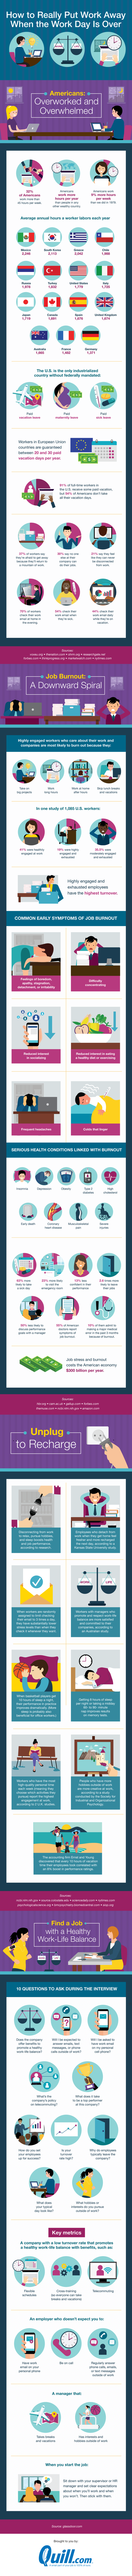 How to really put work away when the work day is over #infographic